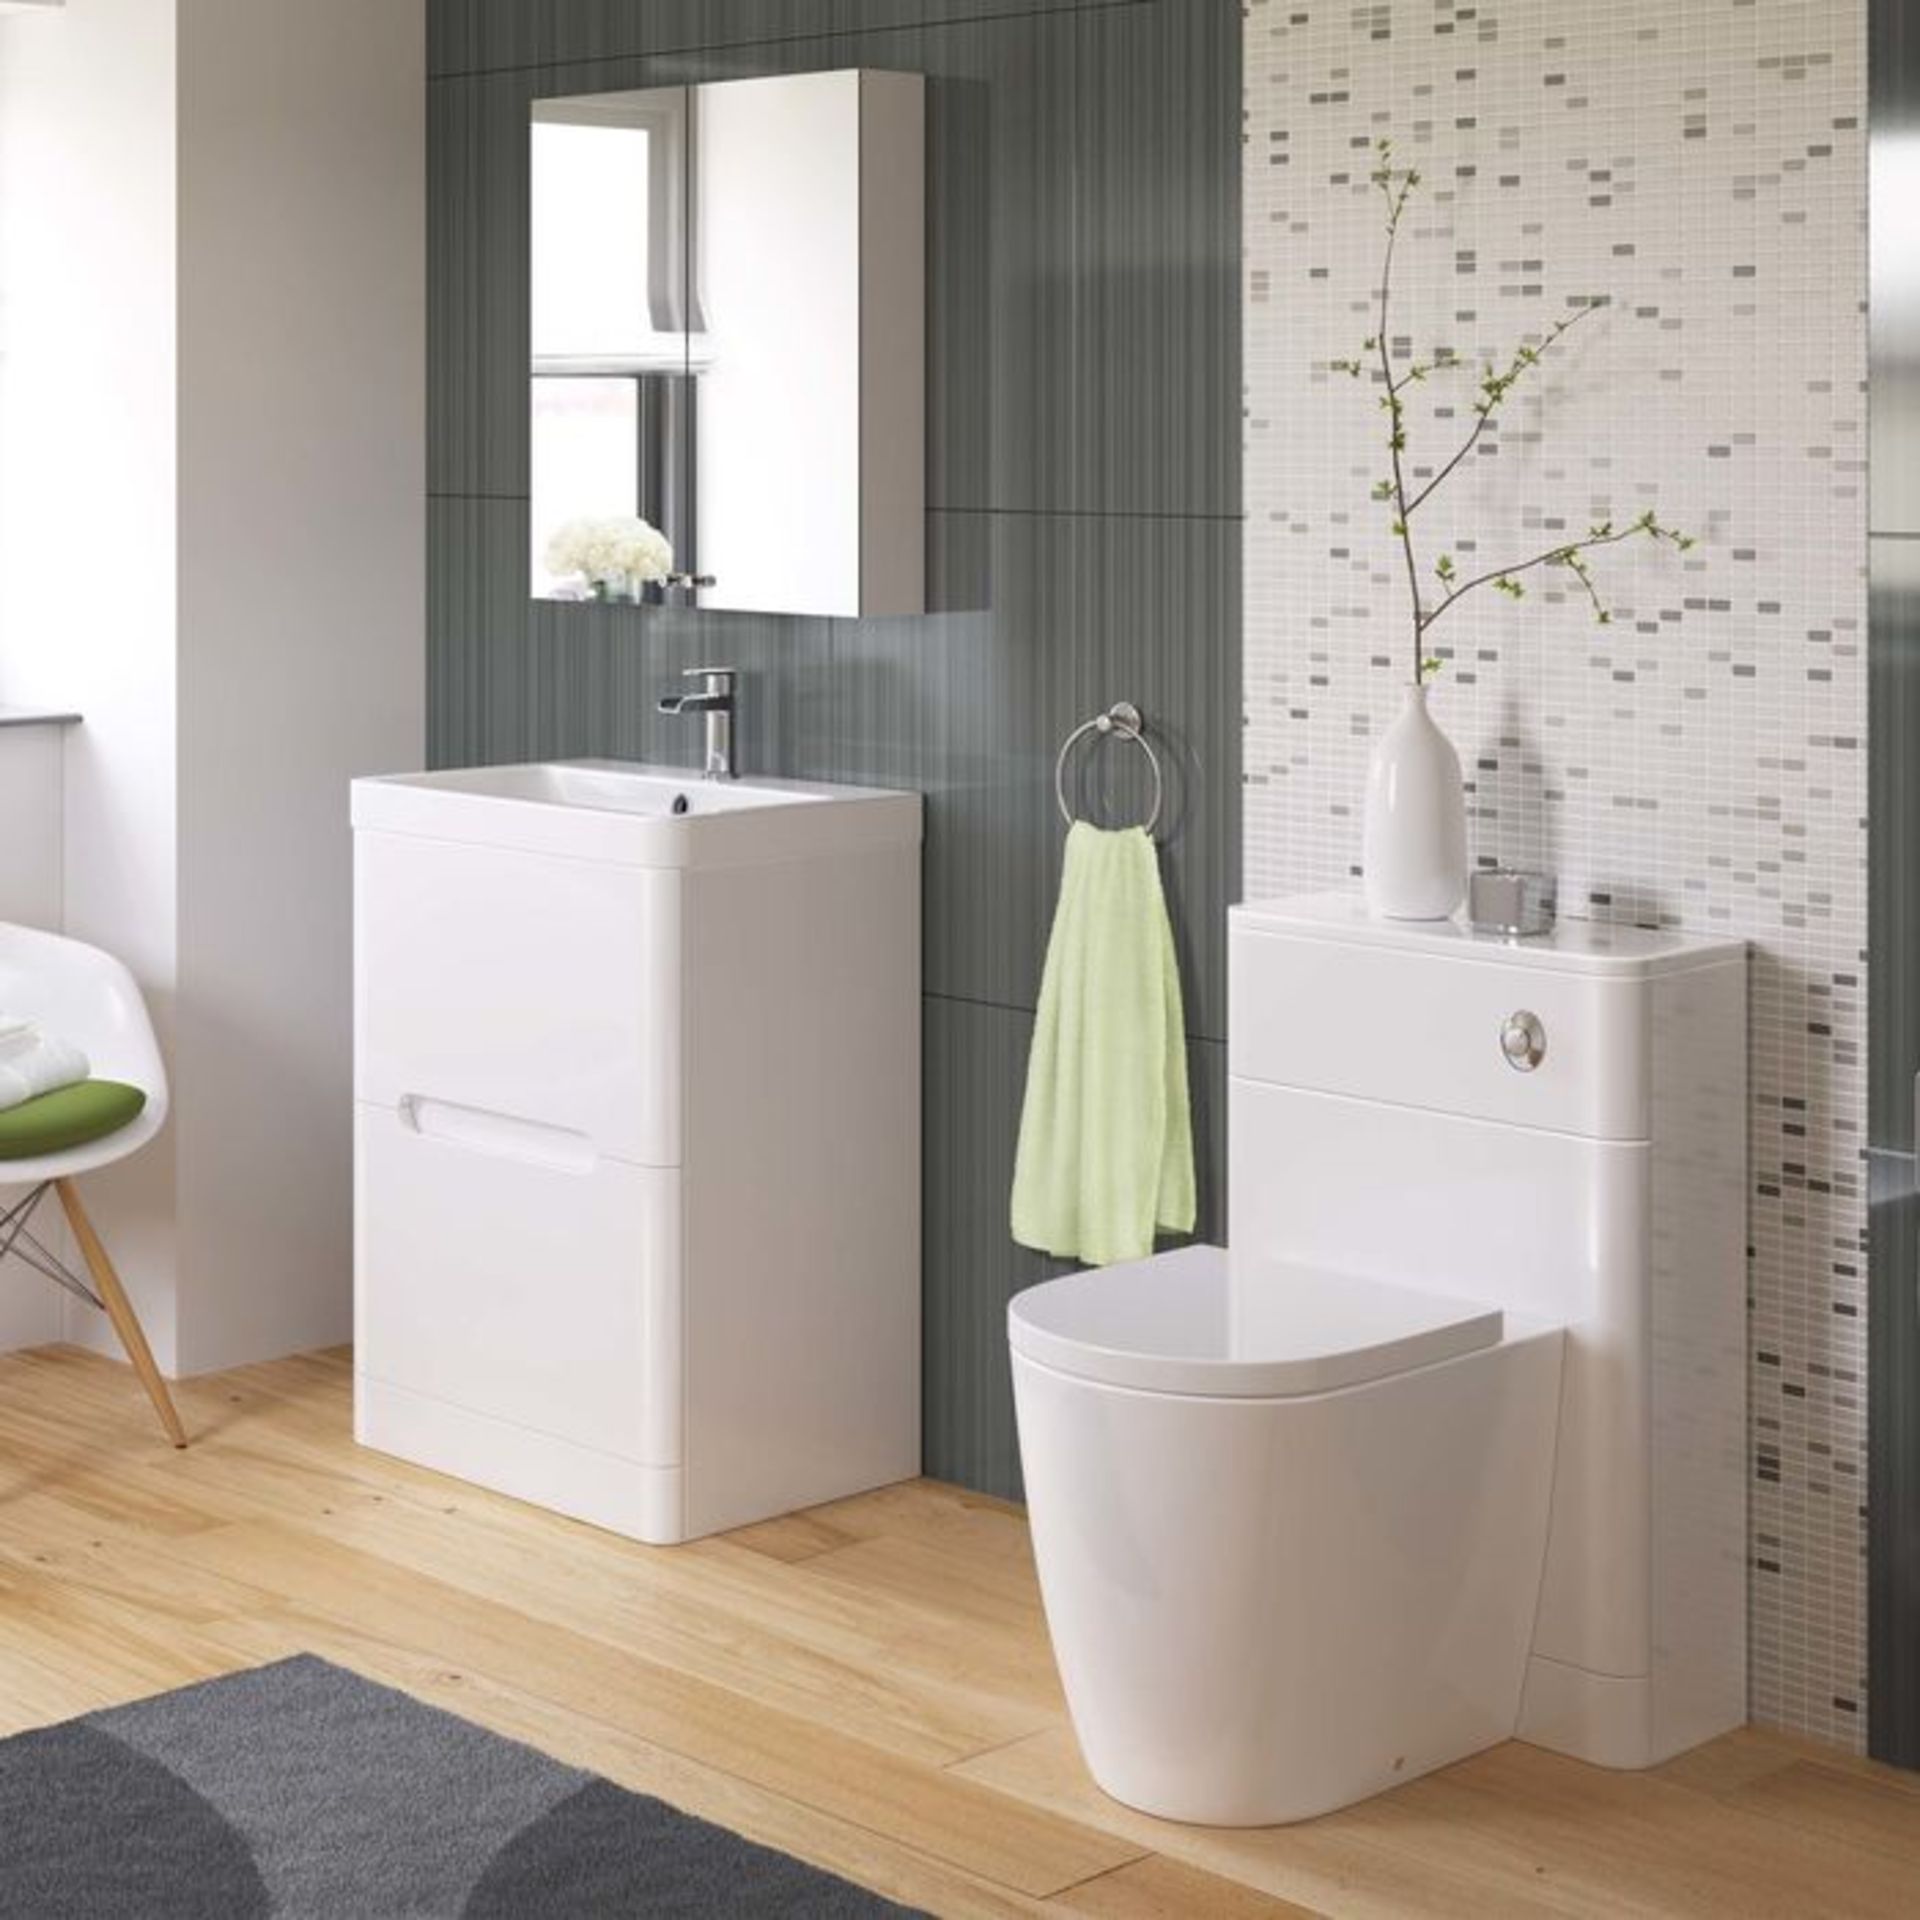 (G75) 600mm Tuscany Gloss White Built In Basin Double Drawer Unit - Floor Standing RRP £499.99. - Image 2 of 5